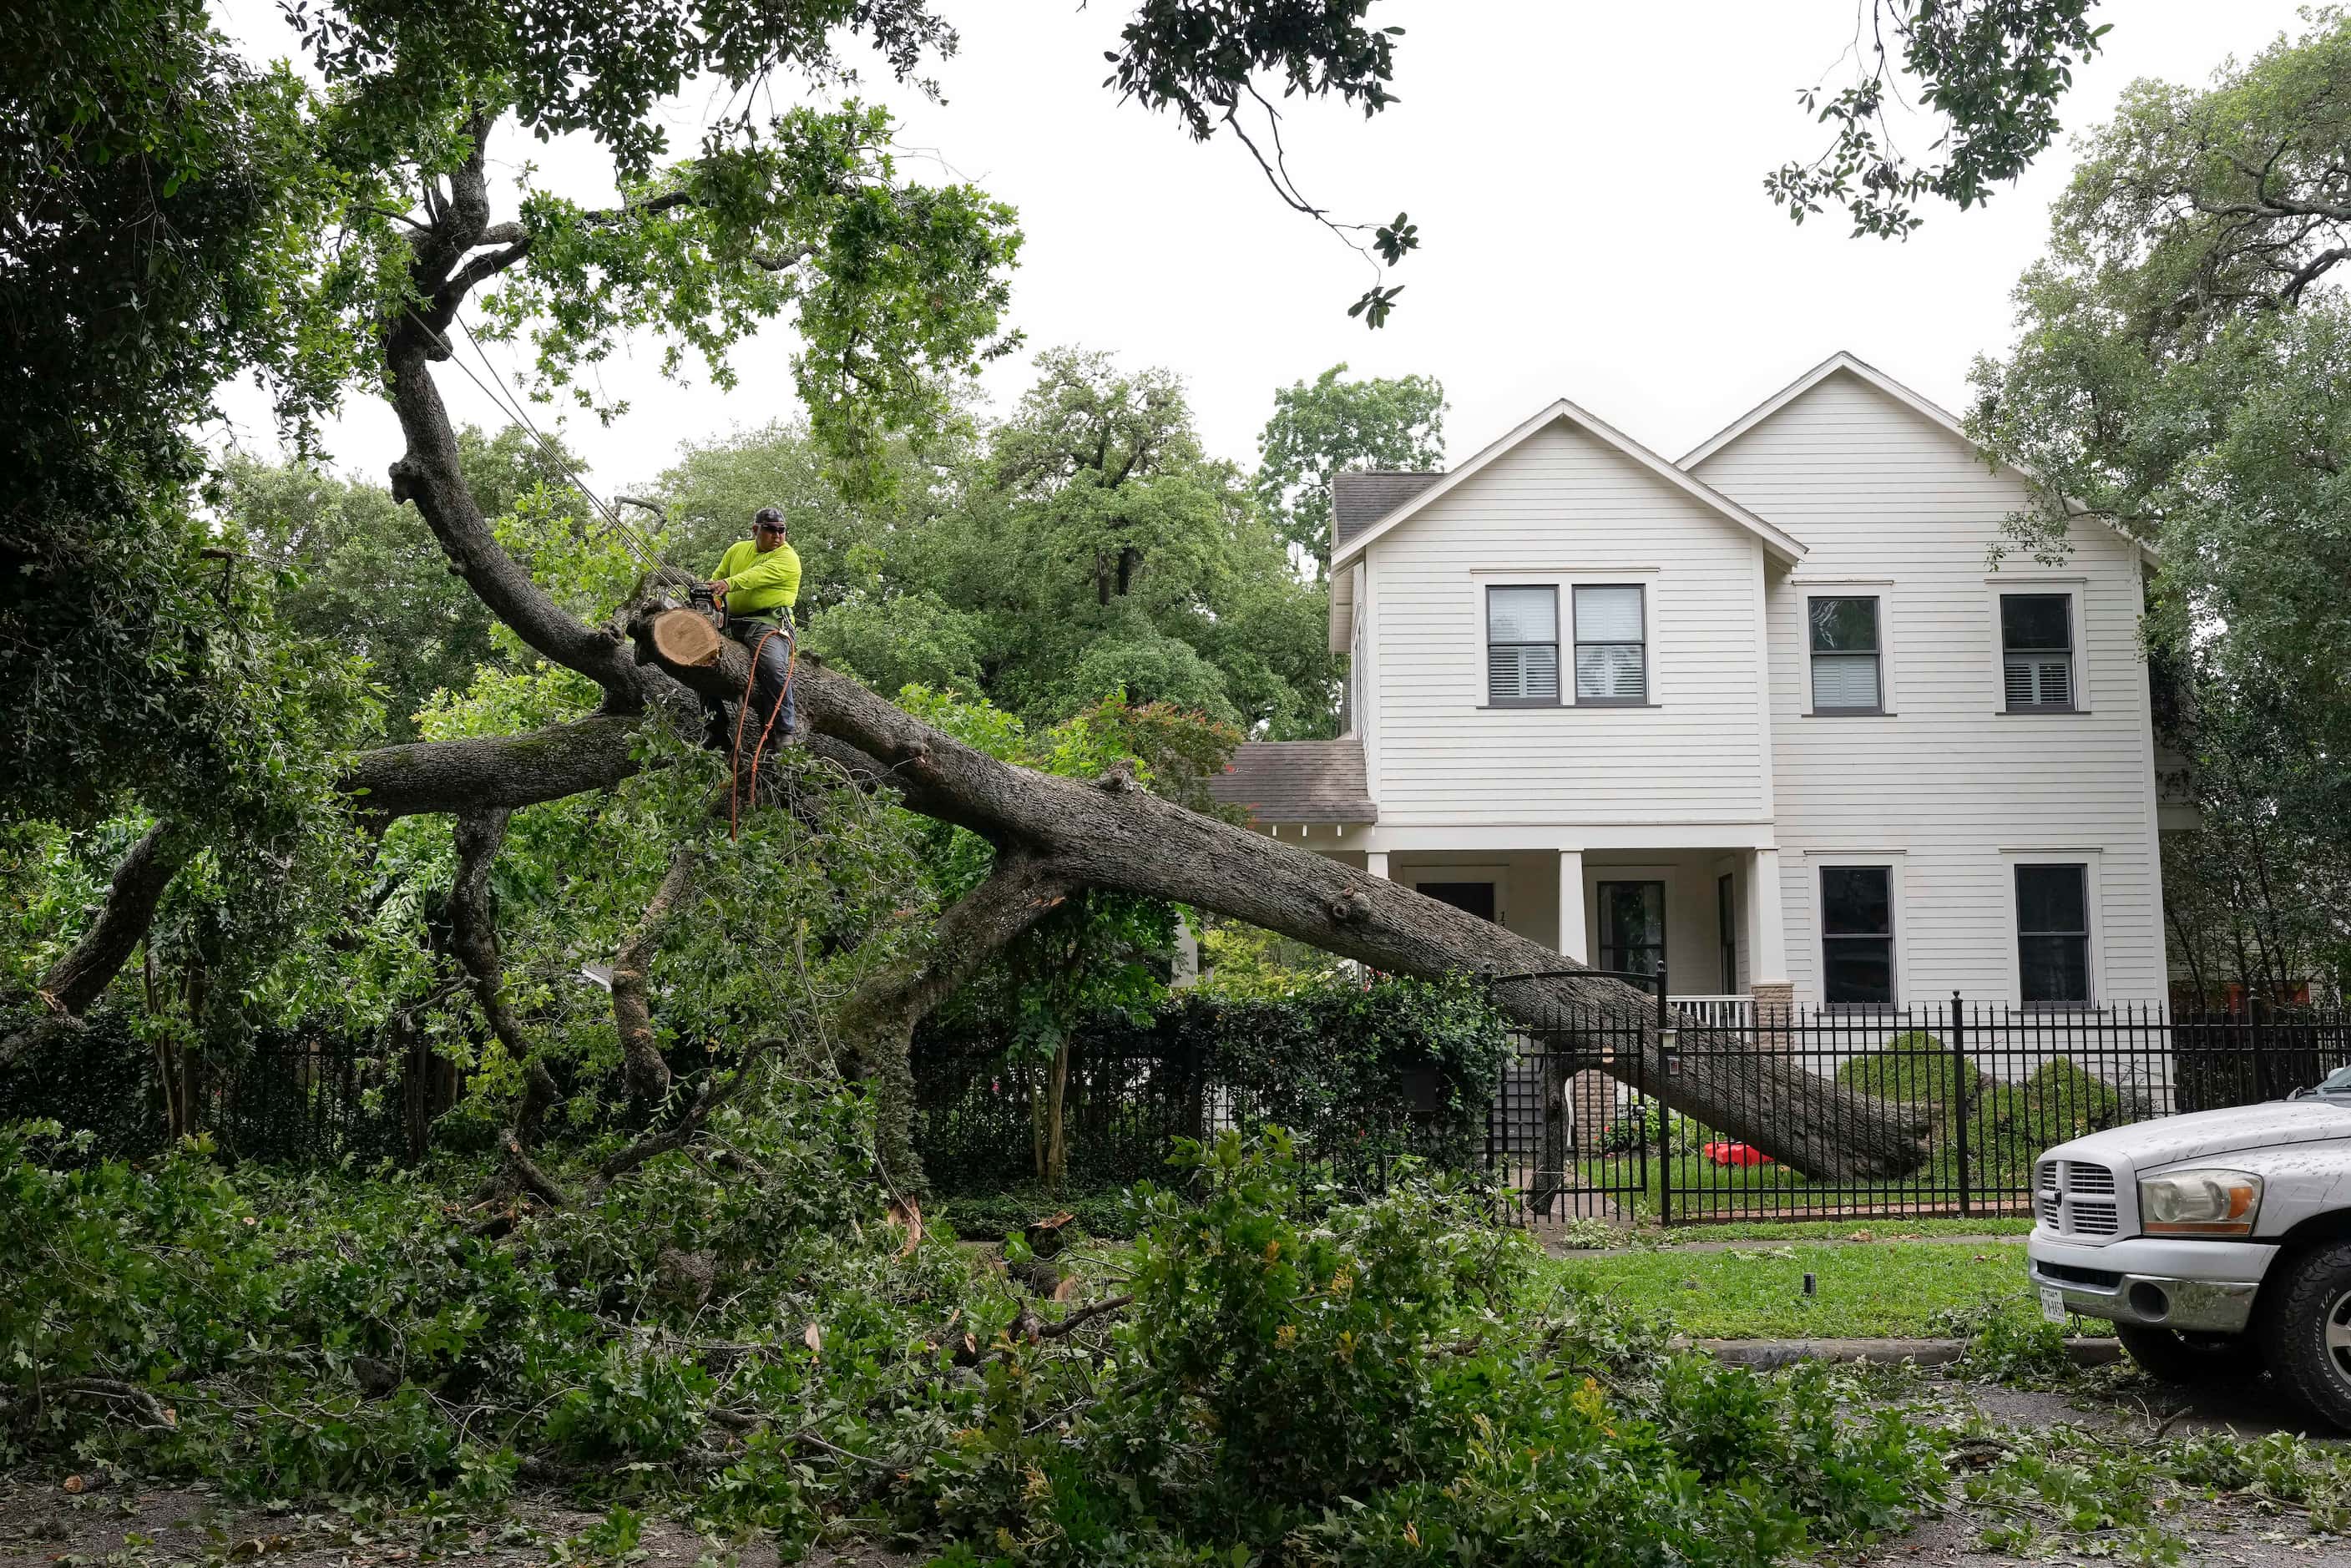 Tree removal serviceman Jose Navarrete removing an uprooted tree that went over the fence on...